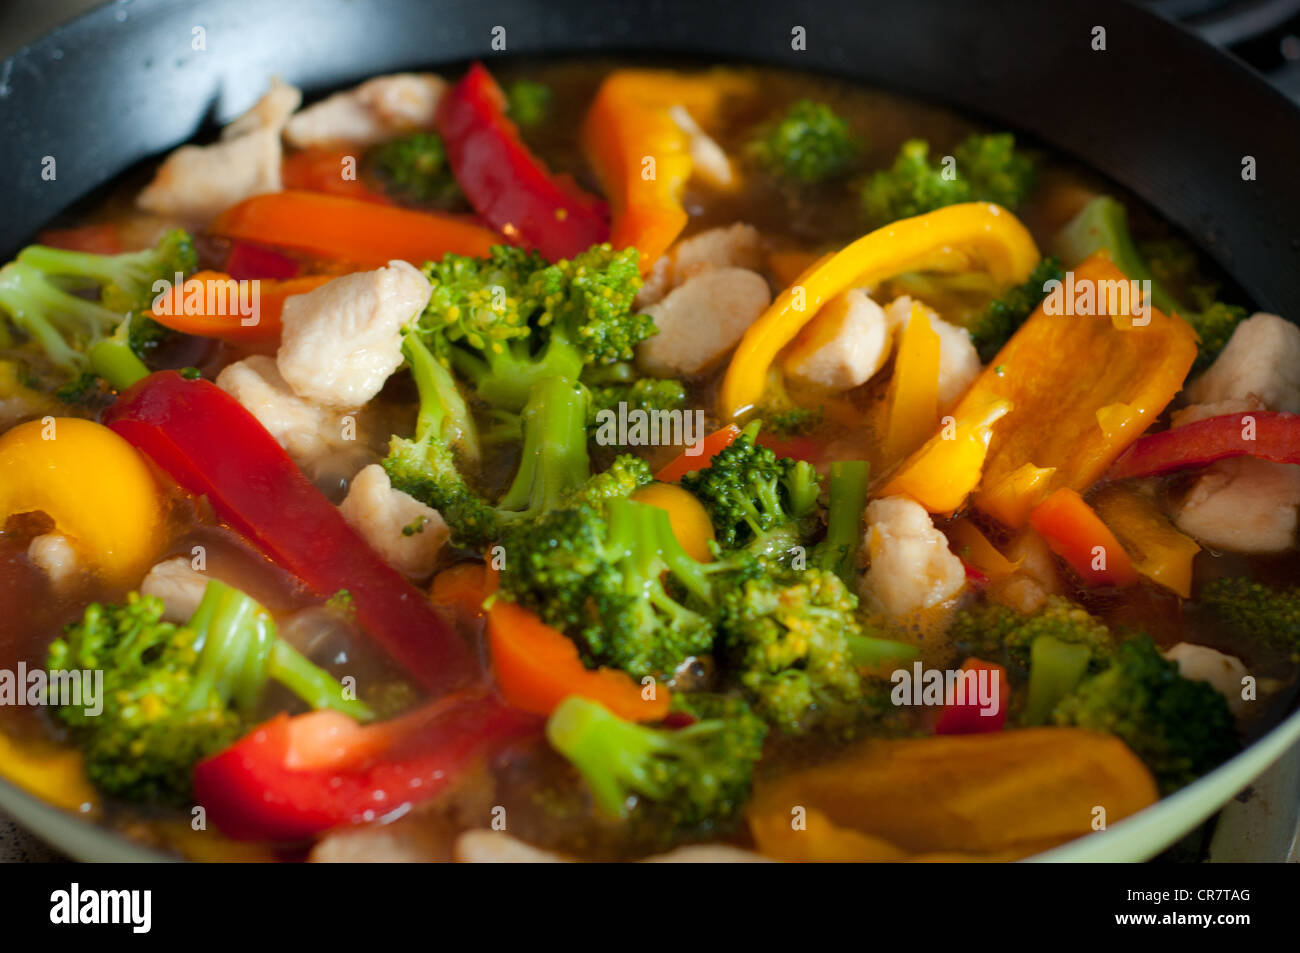 Colorful Chinese vegetable and chicken saute in wok Stock Photo